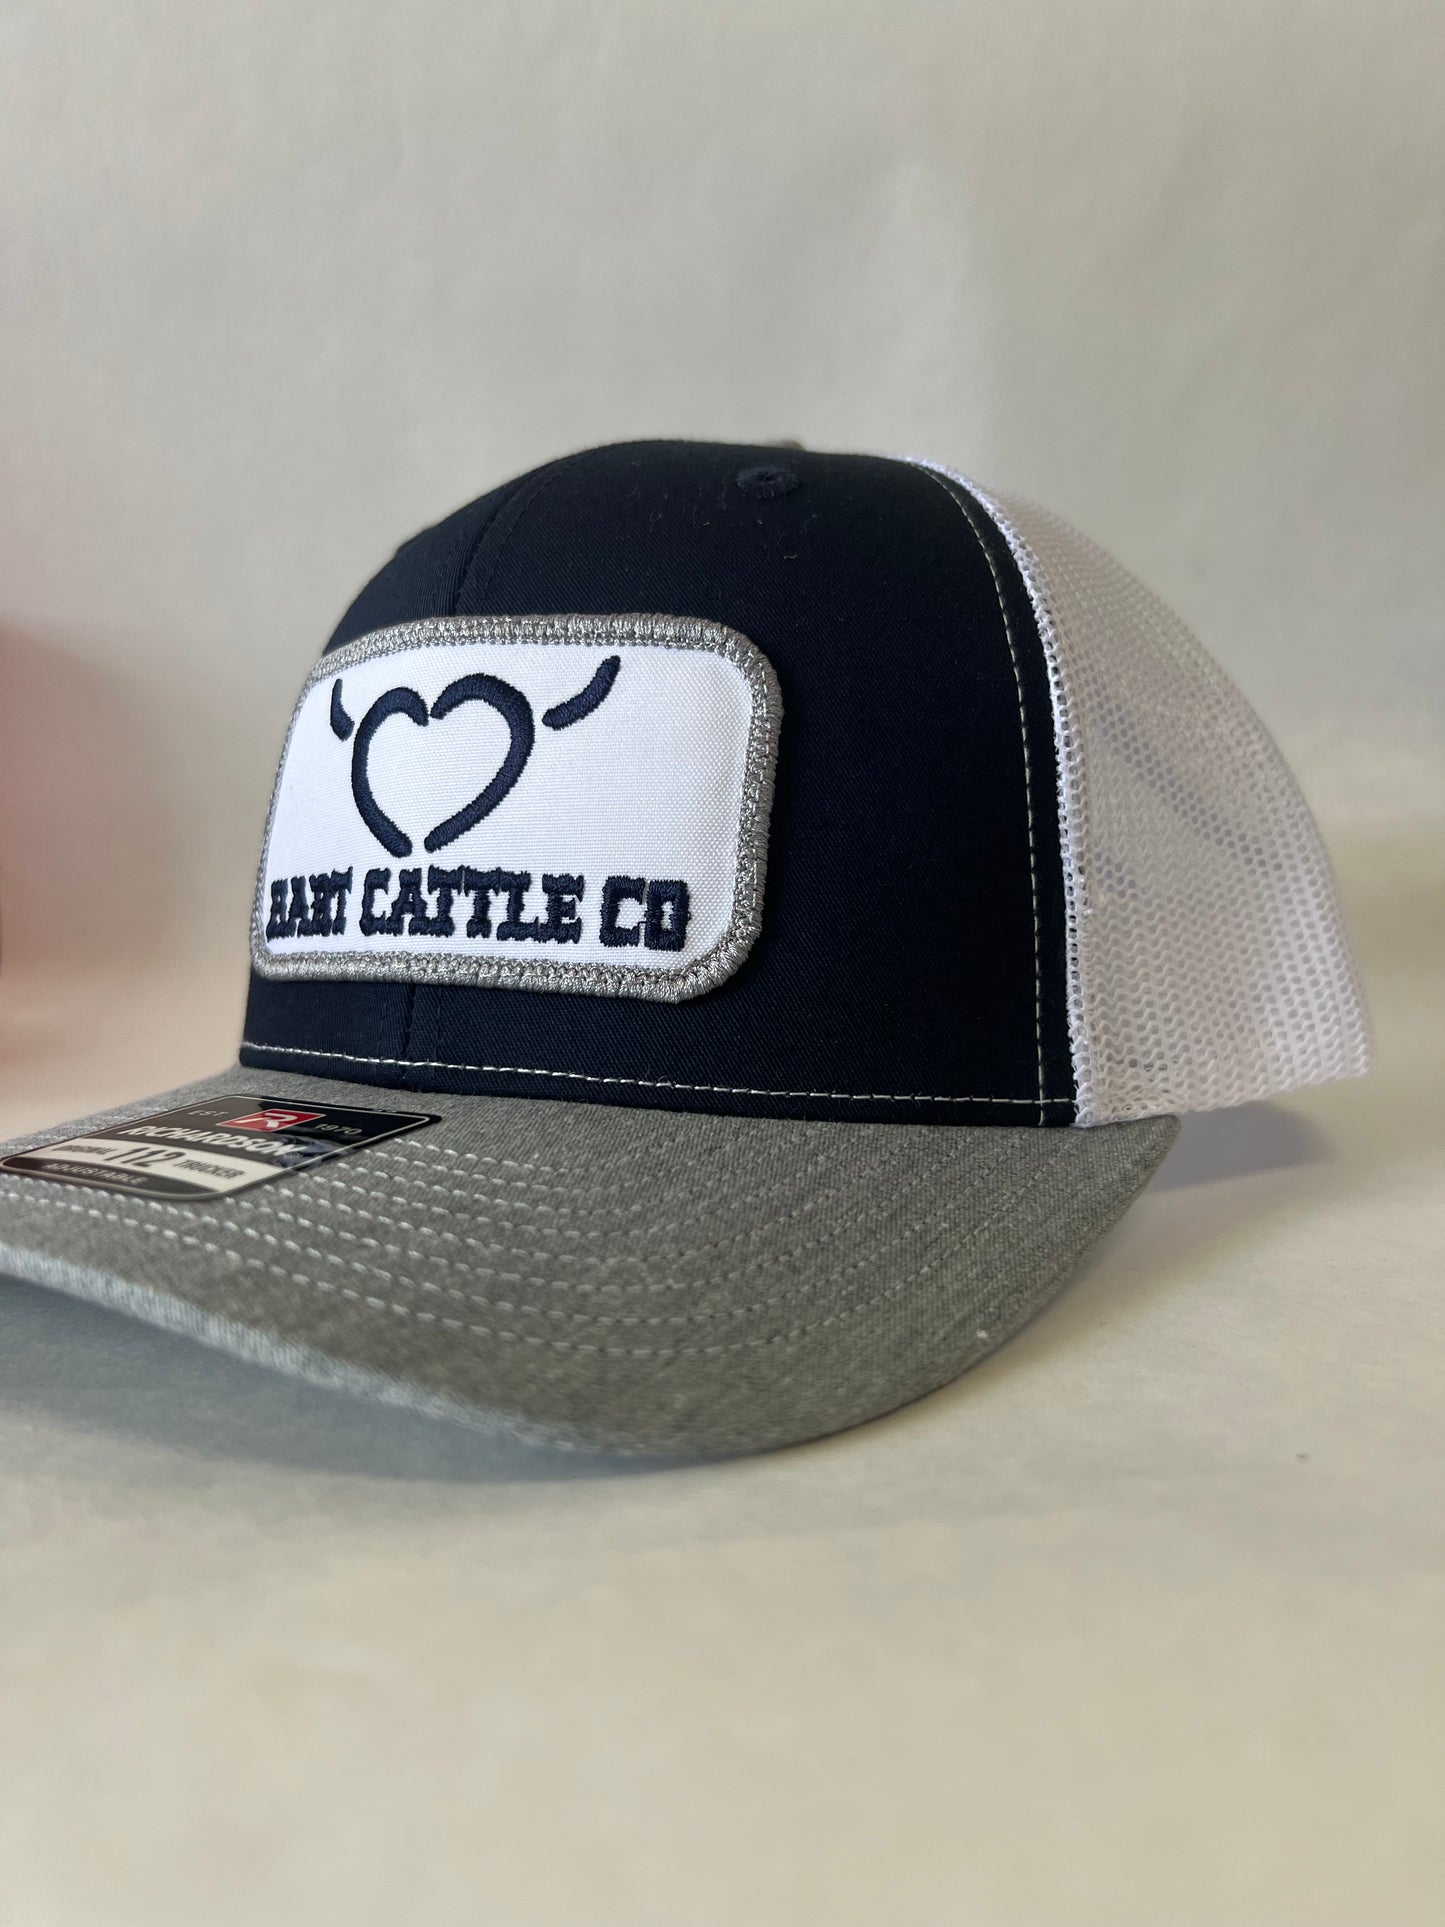 Hart Cattle Co. Patch Navy and Grey